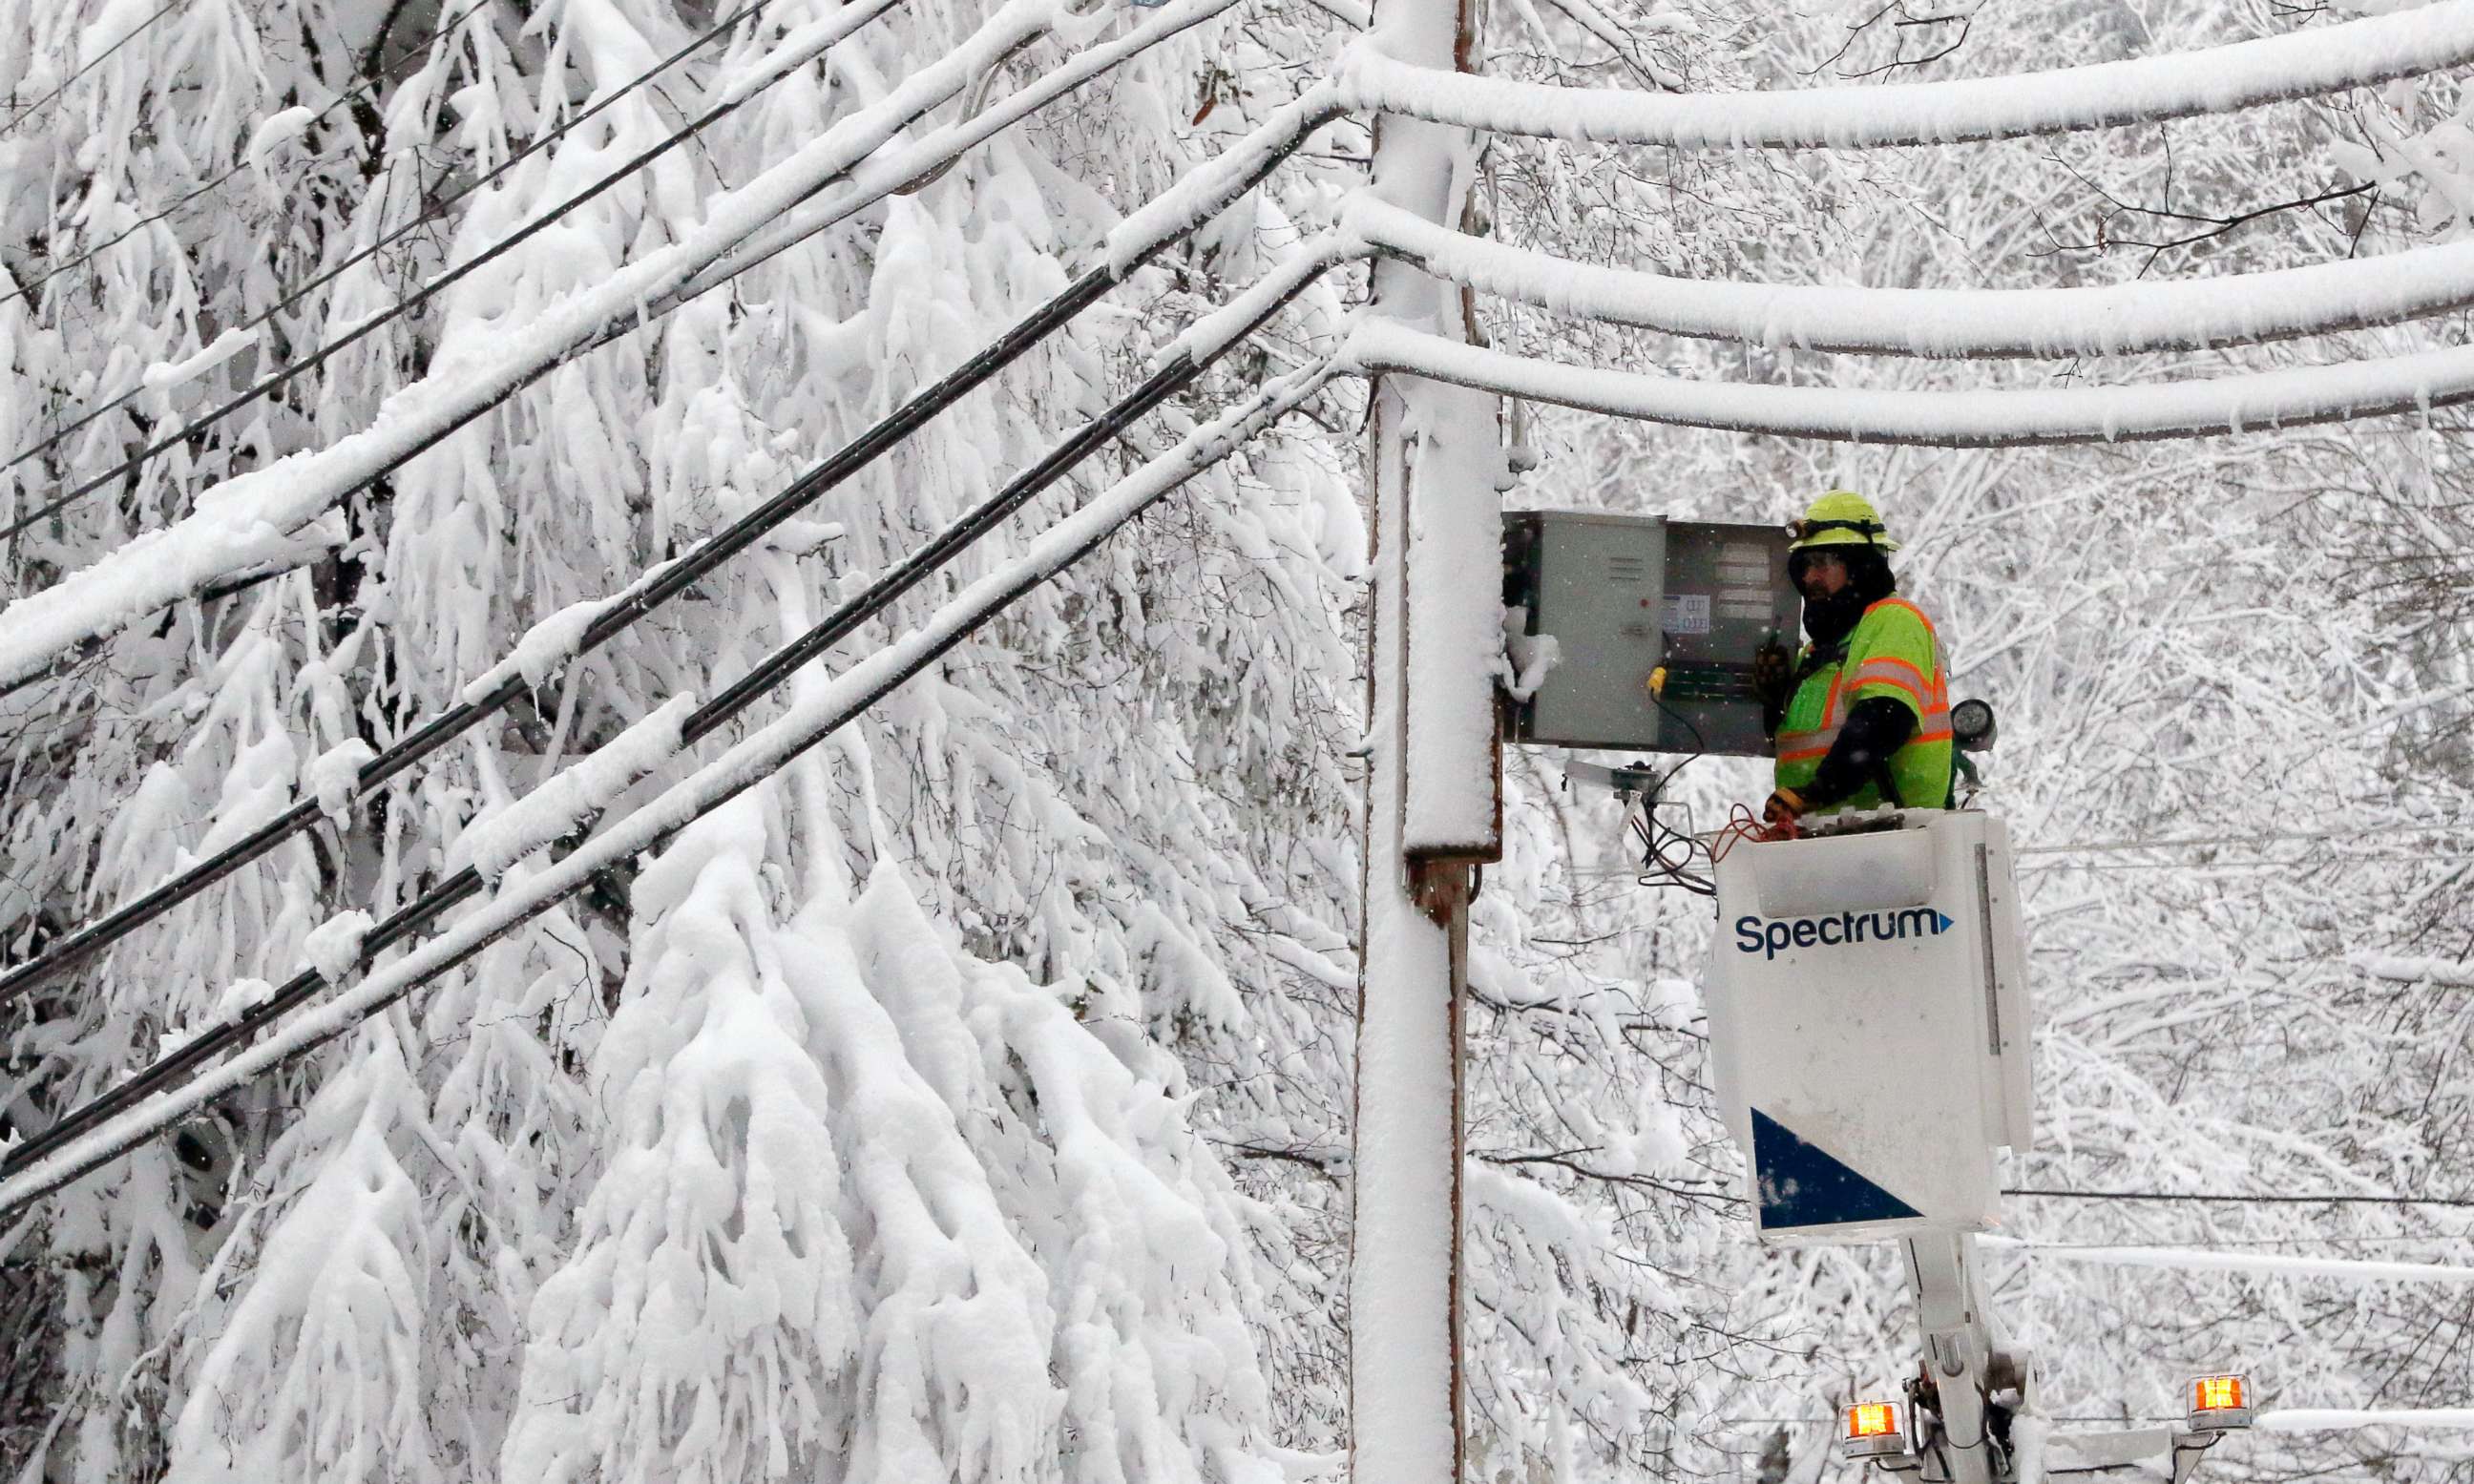 PHOTO: A lineman works to restore power amid limbs sagging with heavy wet snow after a snowstorm, March 8, 2018, in Northborough, Mass.  